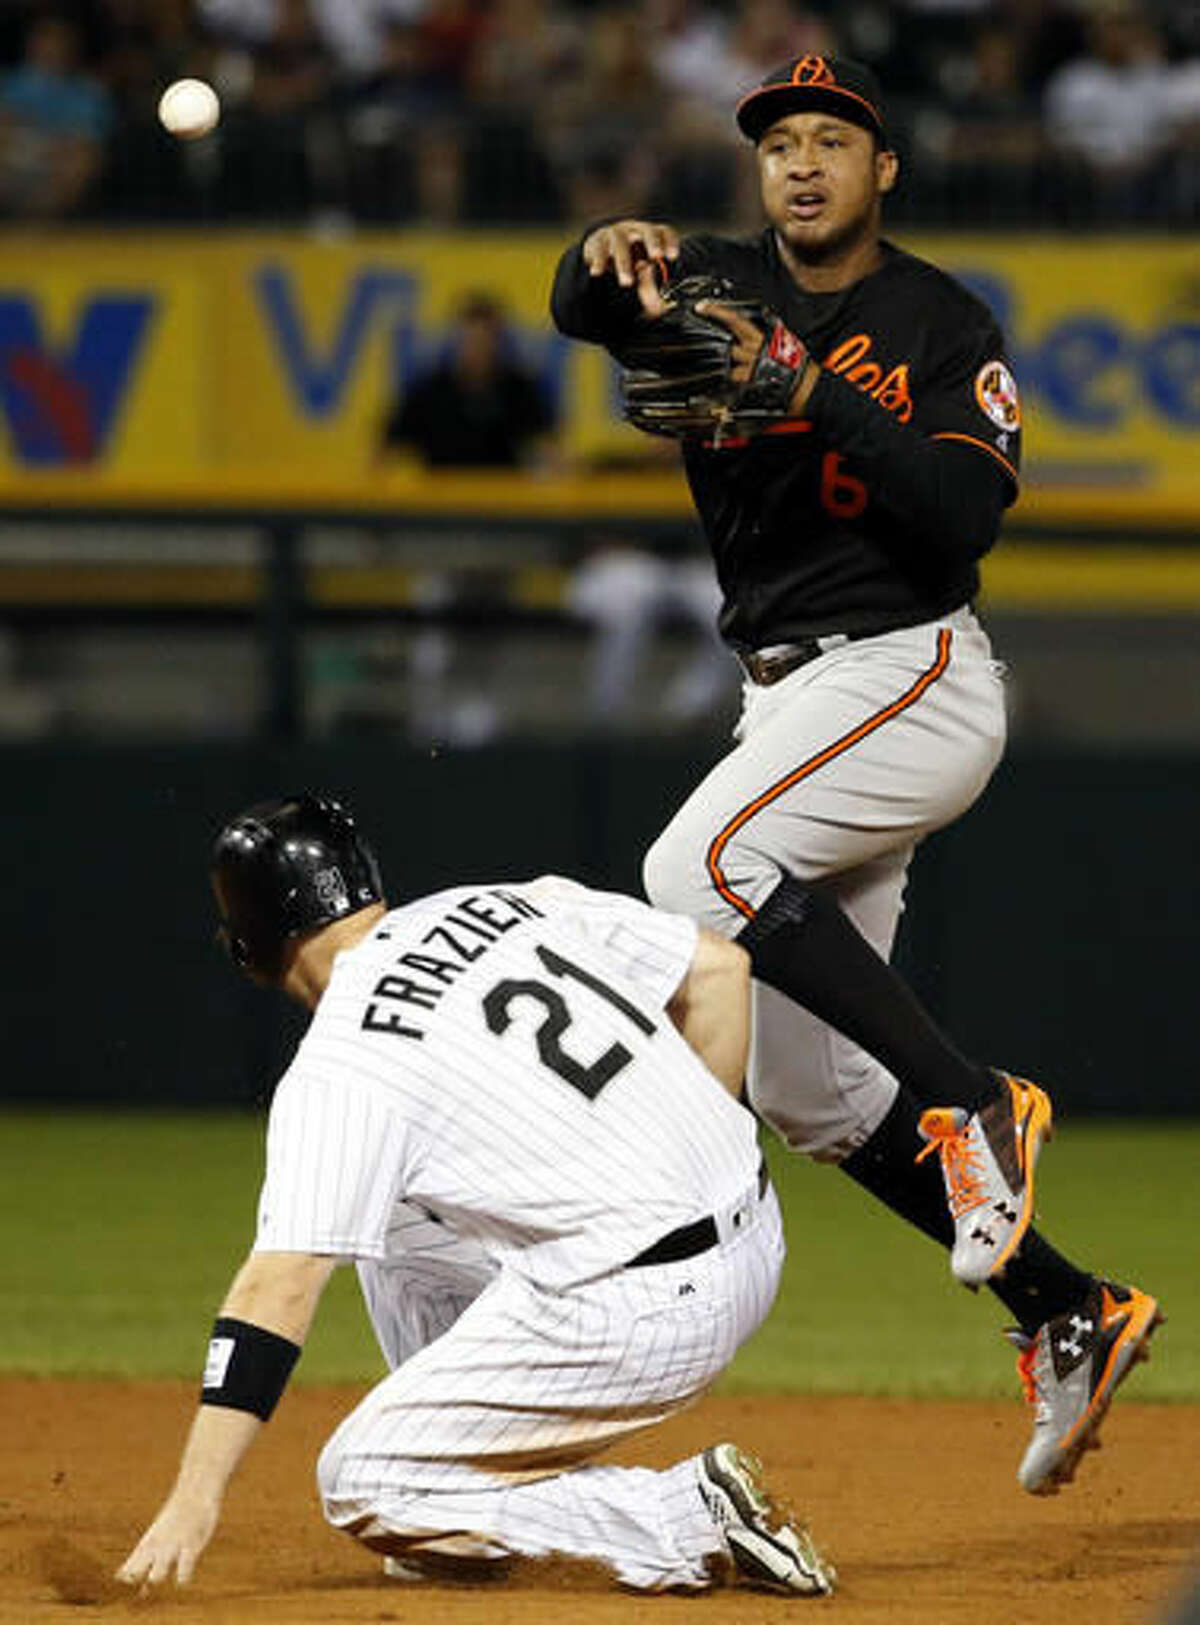 Baltimore Orioles second baseman Jonathan Schoop, right, throws to first after forcing out Chicago White Sox's Todd Frazier during the eighth inning of a baseball game Friday, Aug. 5, 2016, in Chicago. Avisail Garcia was safe at first base. (AP Photo/Nam Y. Huh)